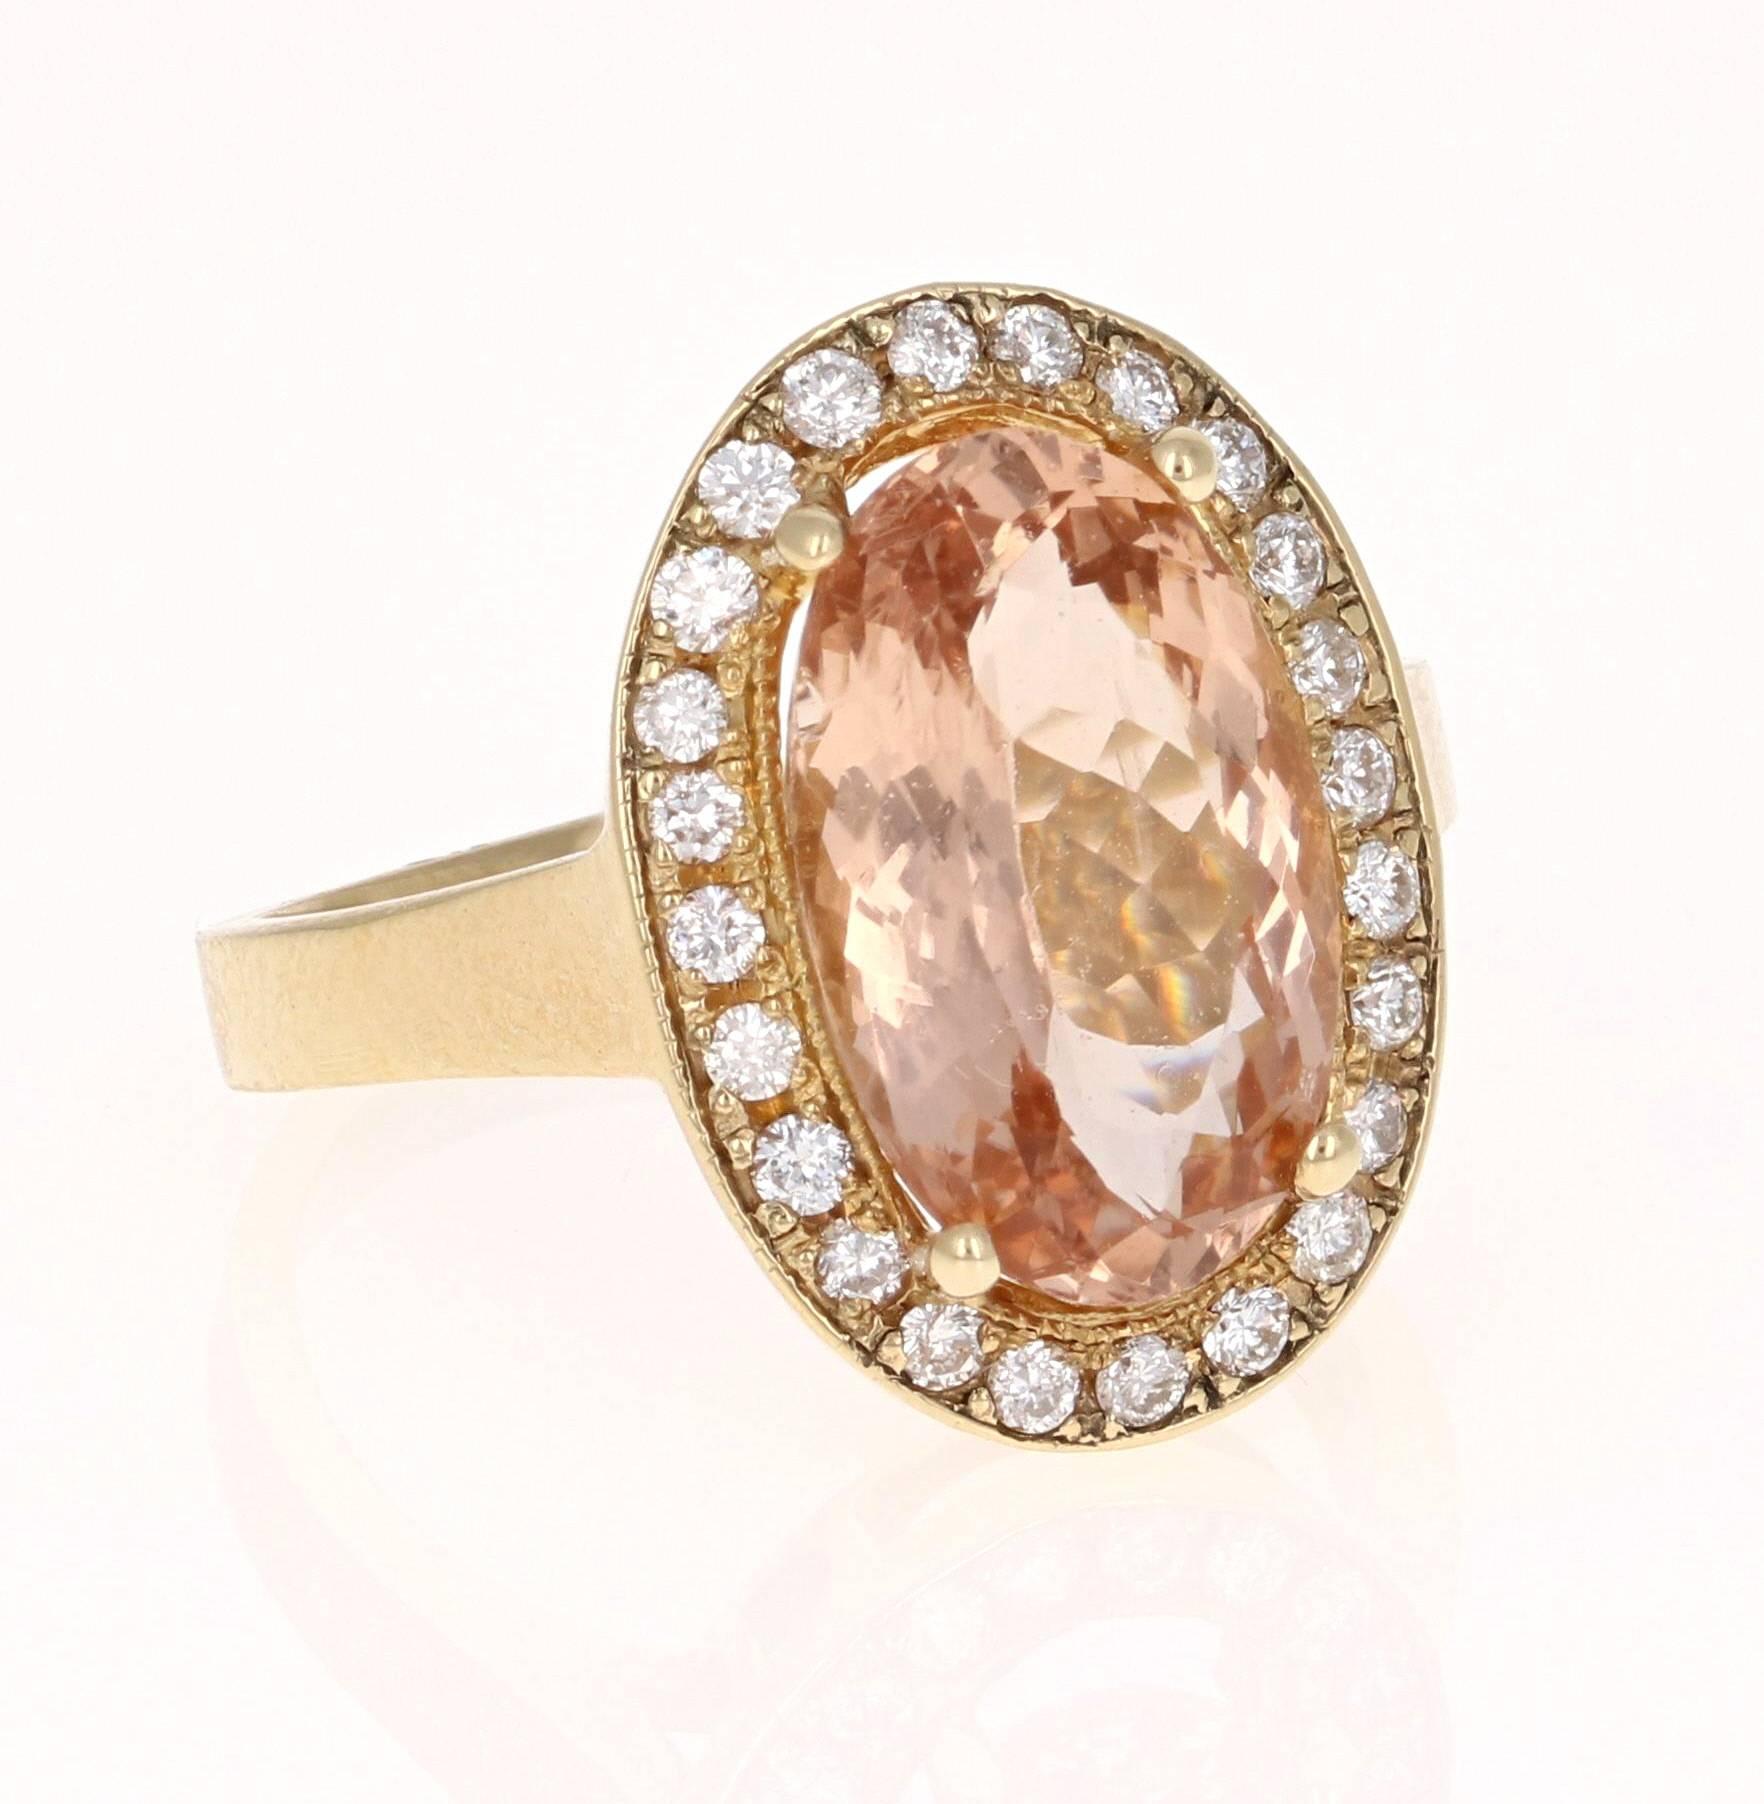 4.38 Carat Morganite Diamond 14K Yellow Gold Cocktail Ring

This ring is a 14K Yellow Gold Ring which has a 4.01 Carat Oval Cut Morganite in the center of the ring. This ring is surrounded by 24 Round Cut Diamonds that weigh a total of 0.37 carat.